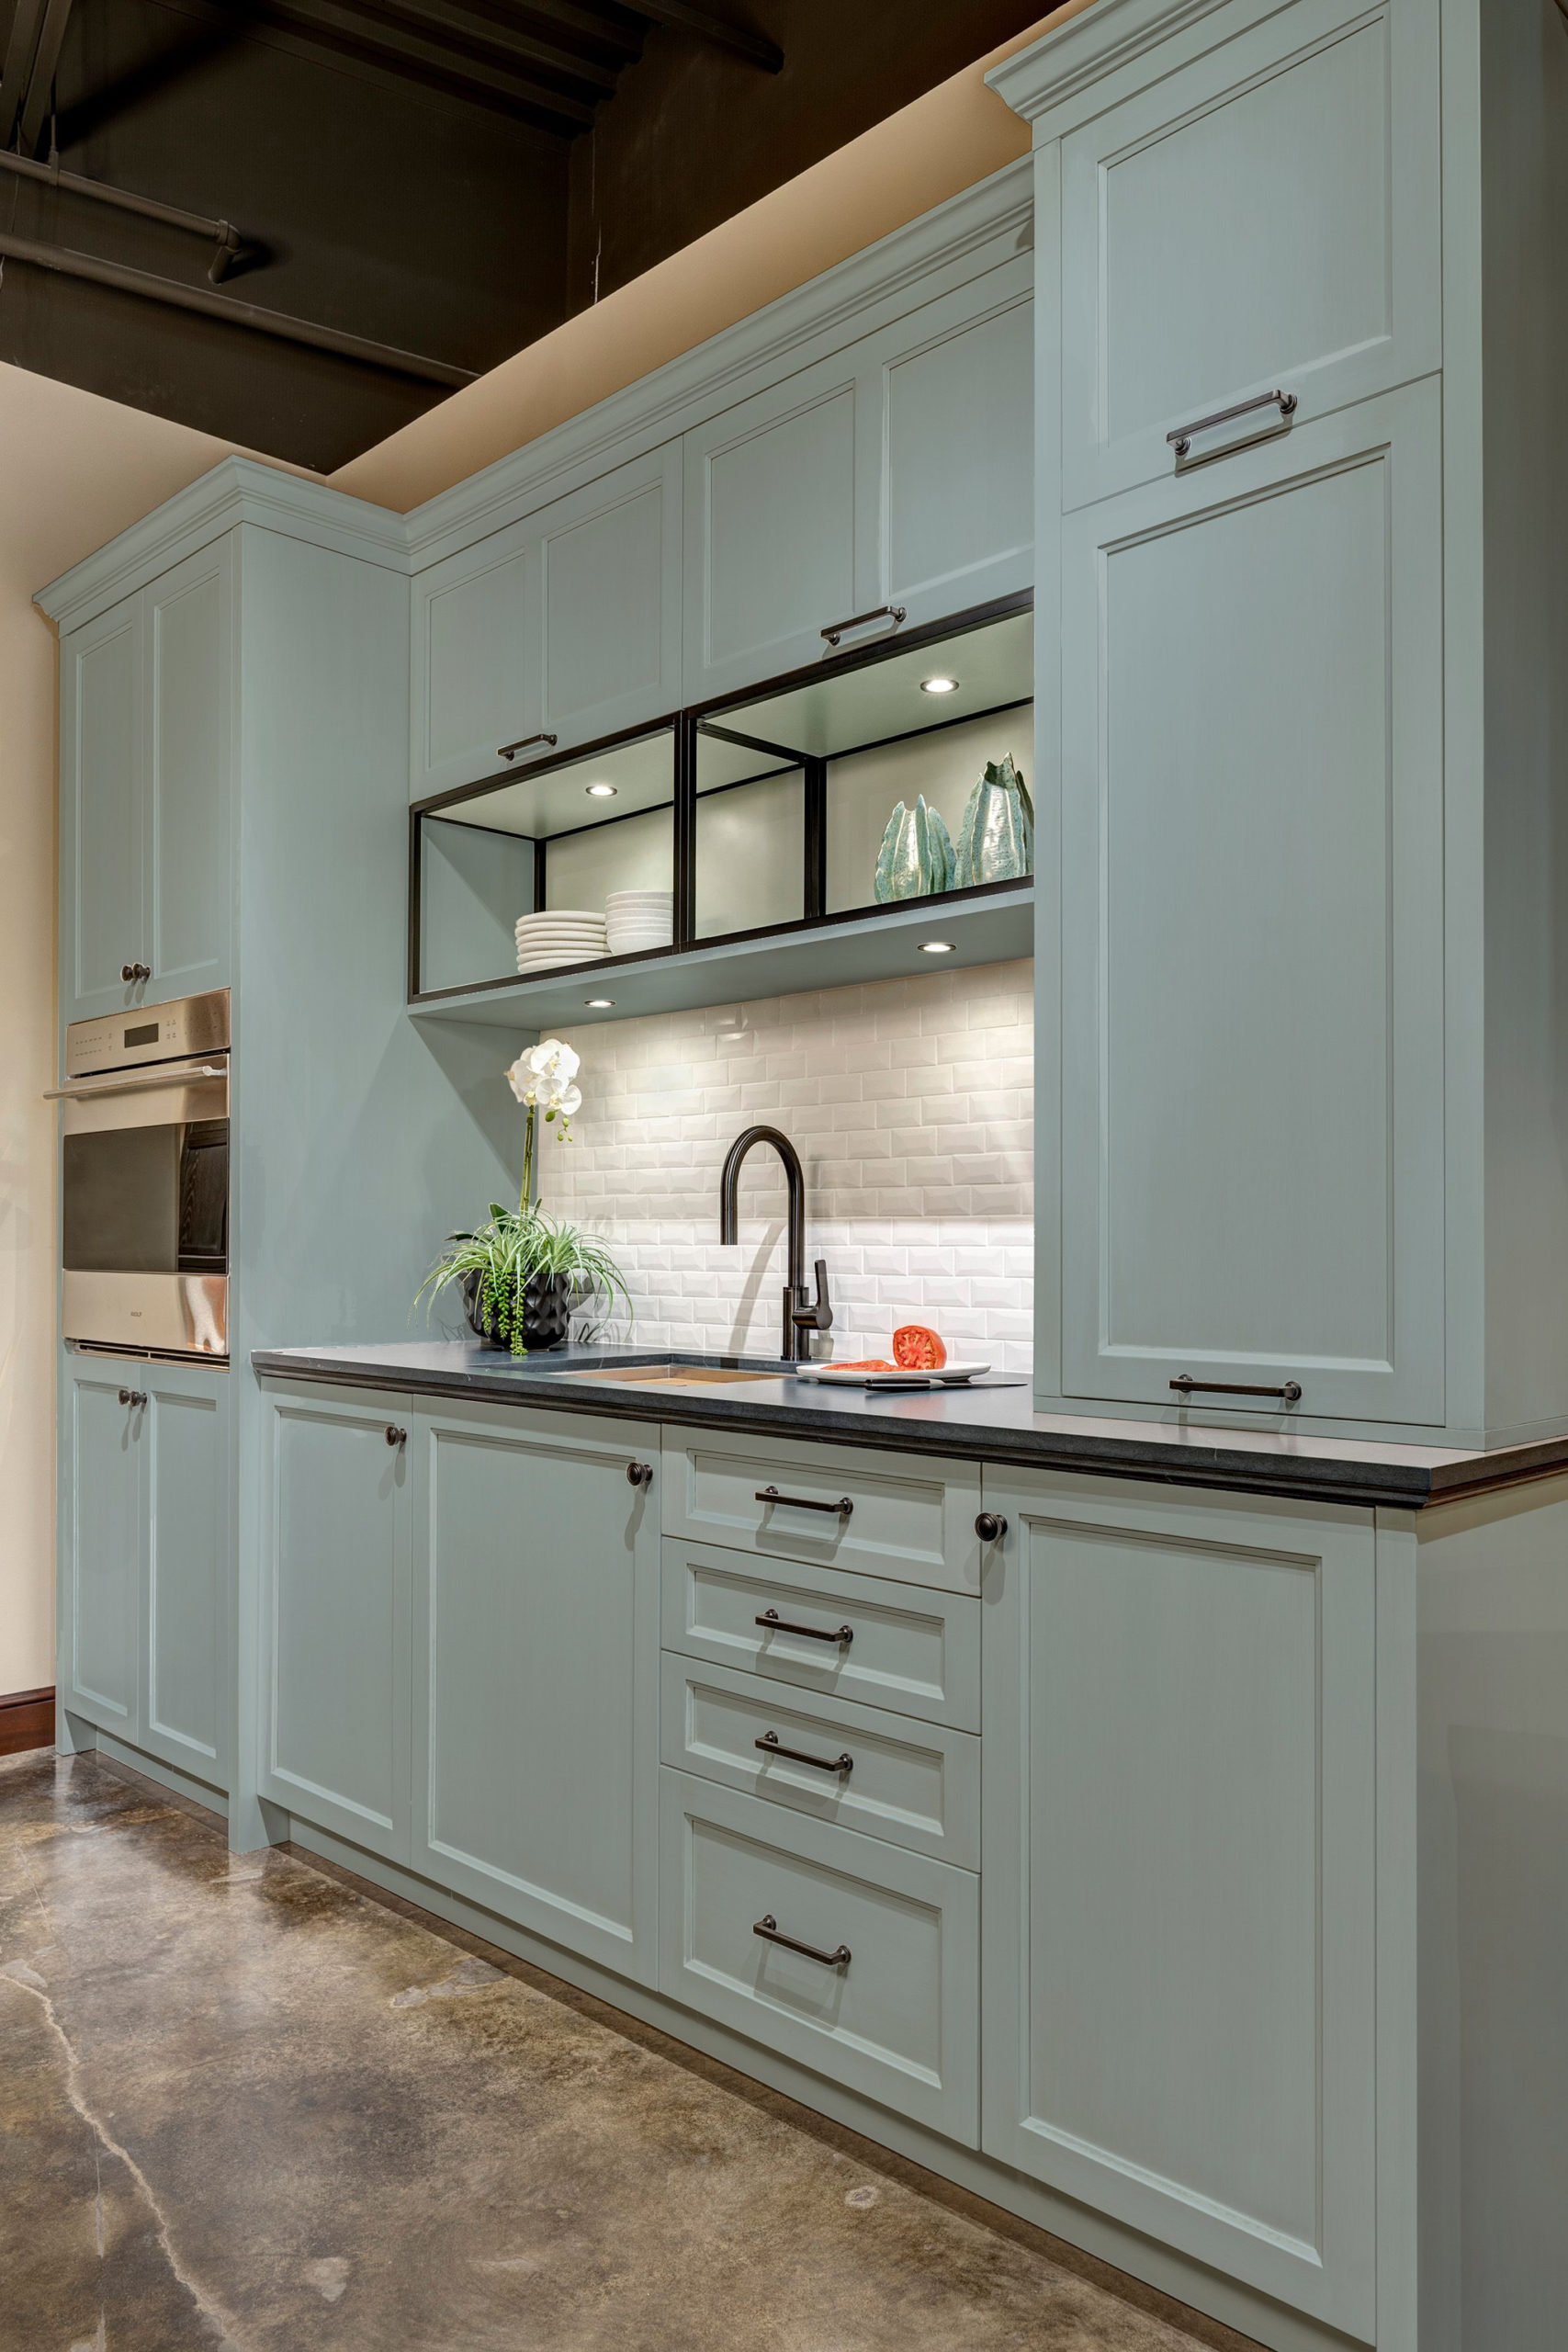 Kitchen cabinets painted in Dutch Tile Blue SW Color match